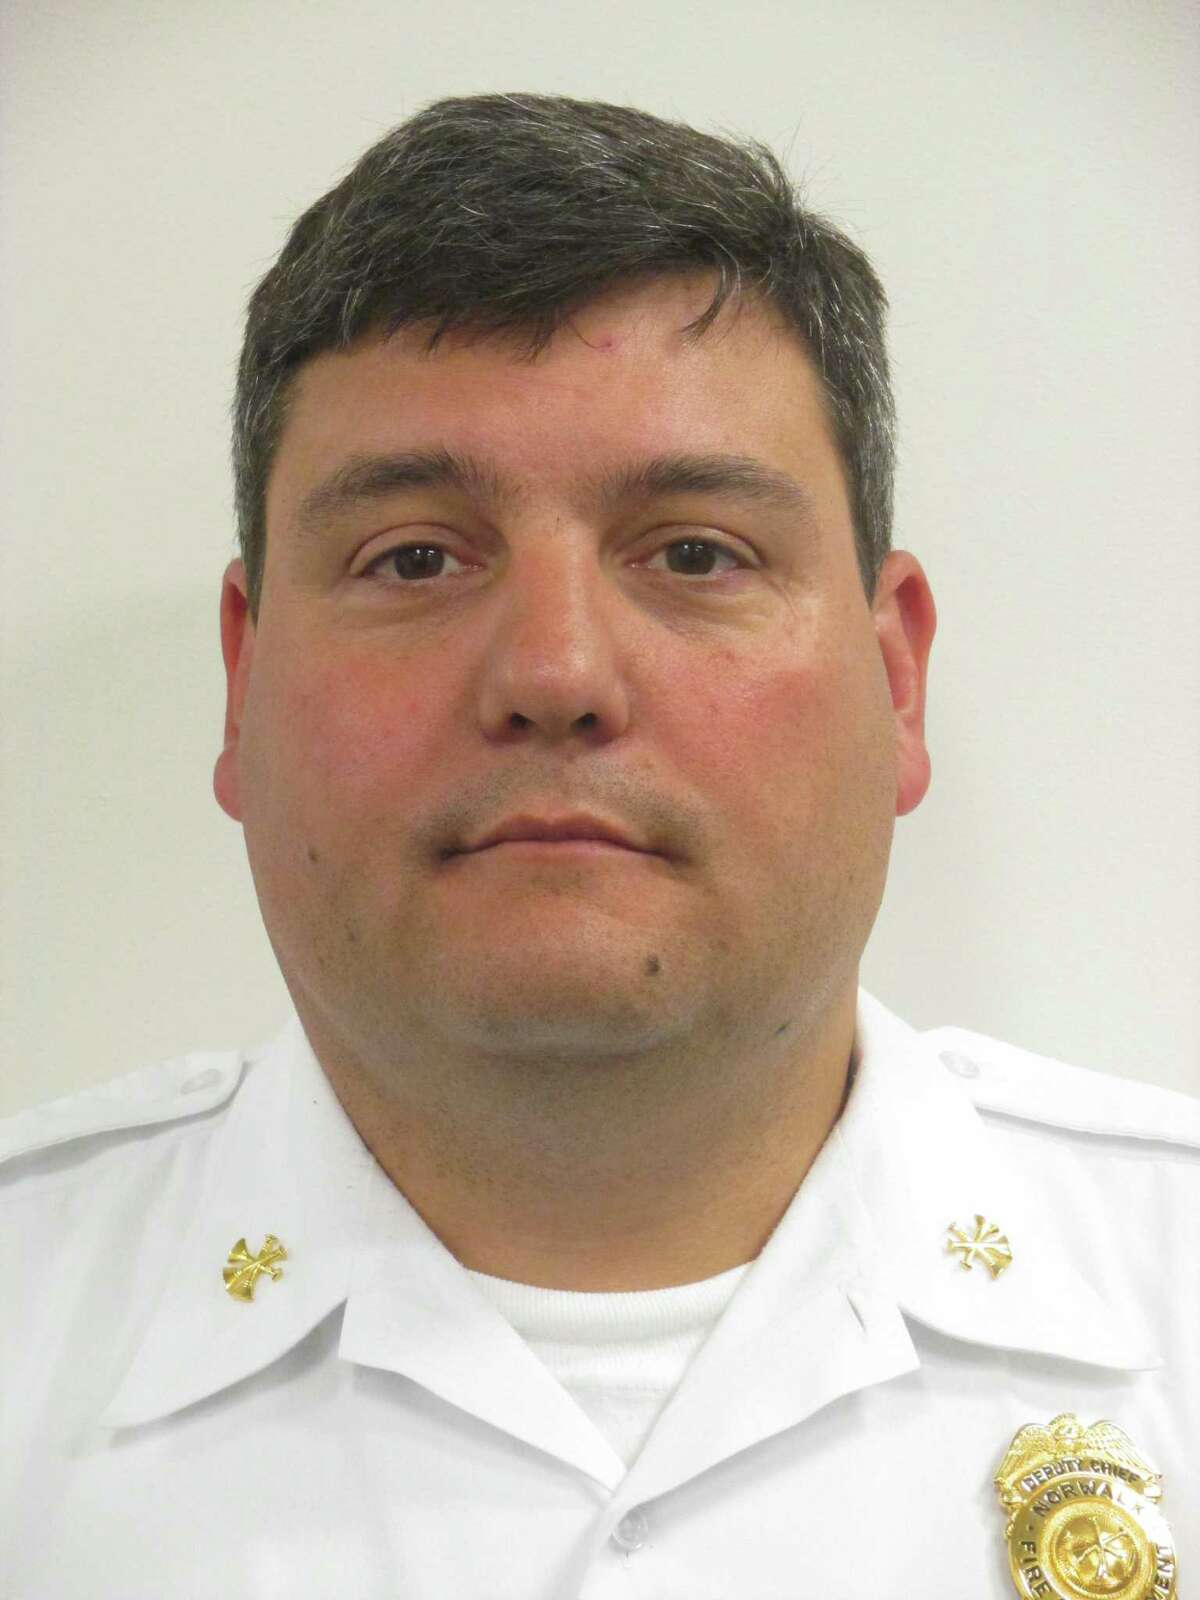 The New Canaan Fire Department has provided safety tips about handling, and dealing with fires in college, as students from the area have attended their next level of schooling during the recent month. New Canaan Fire Chief Albert “Albie” Bassett is shown in a recent year.